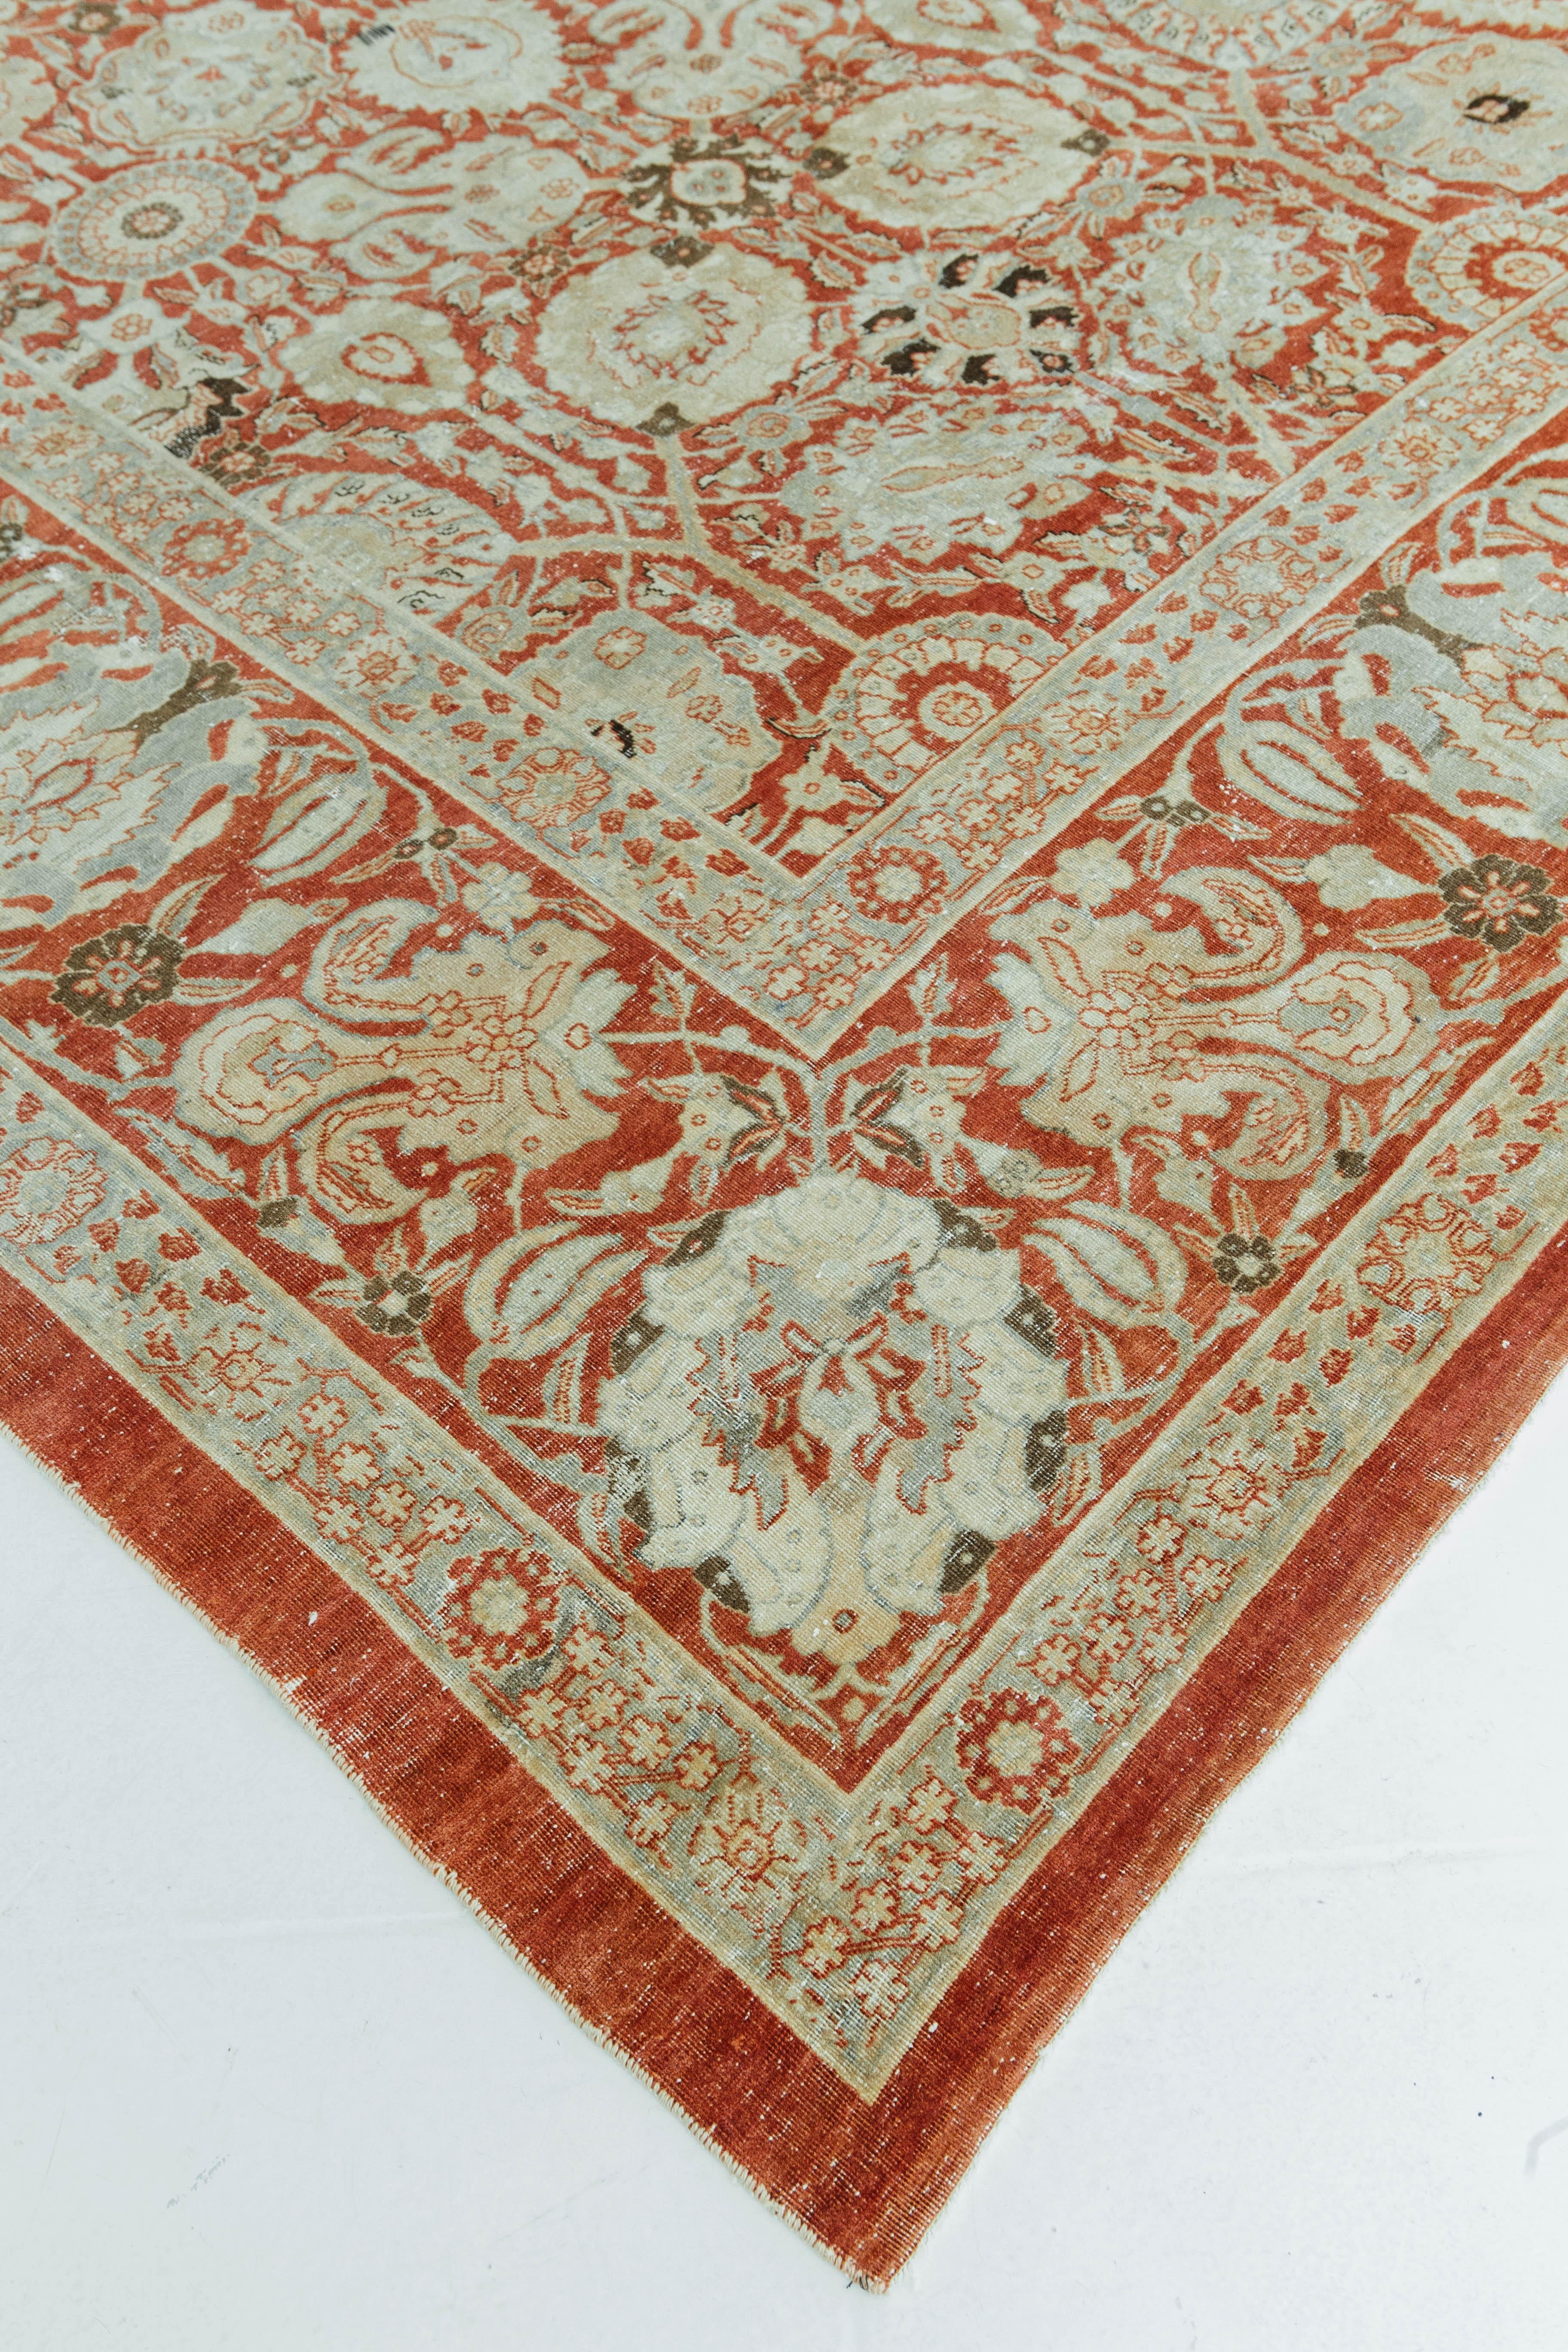 A rust and orange antique Persian Tabriz rug handmade in ancient Persia in the latter half of the 19th century. This piece is constructed out of wool in the pile weave method and features Persian floral and traditional design motifs.


Rug Number